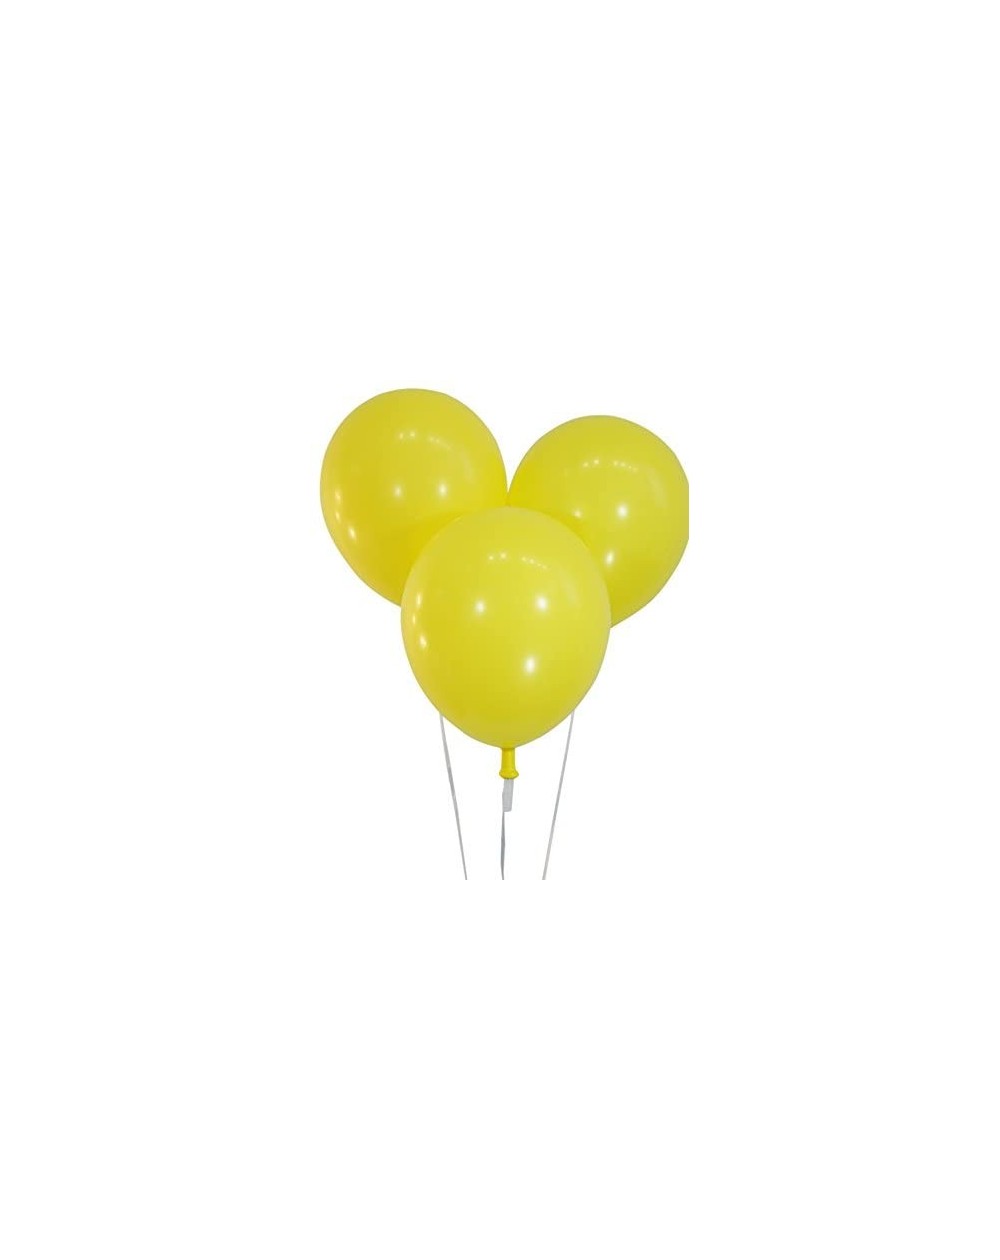 Balloons Creative Balloons 12" Latex Balloons - Pack of 100 Pieces - Pastel Yellow - Pastel Yellow - CK12MCT7V1J $29.80